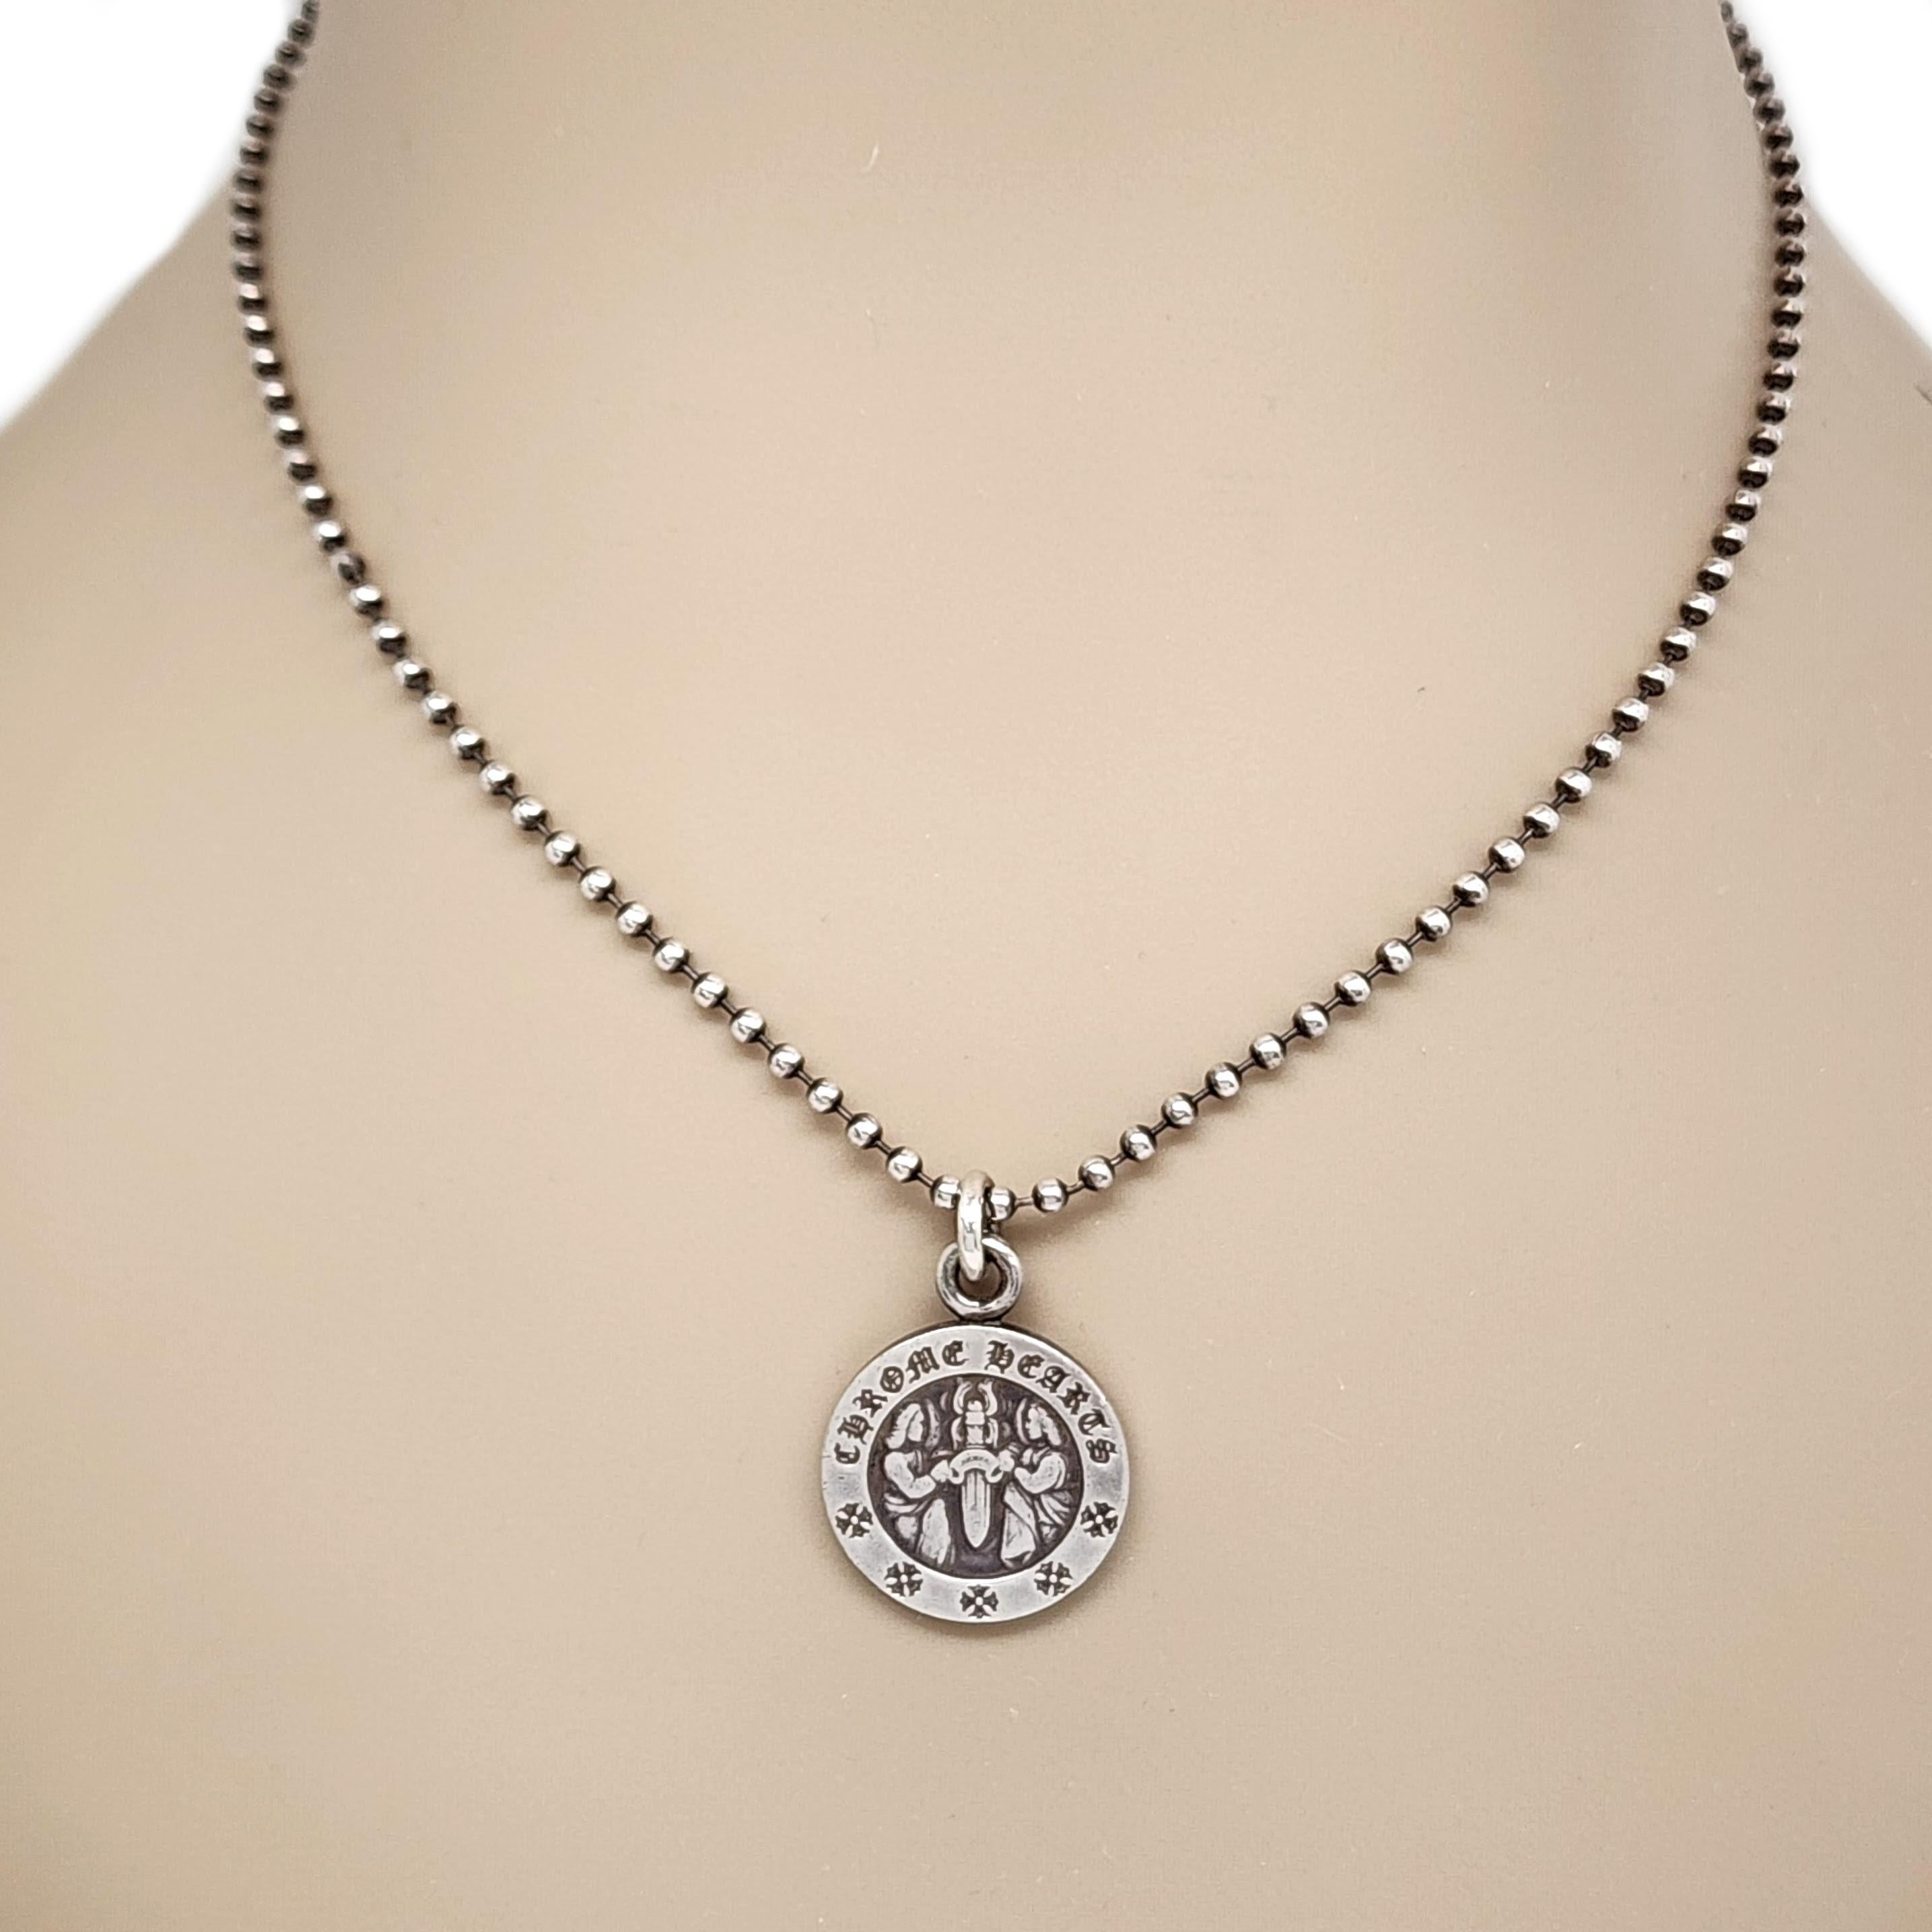 Sterling silver Angel medallion with beaded ball chain by Chrome Hearts.

Chrome Hearts double sided round medallion features 